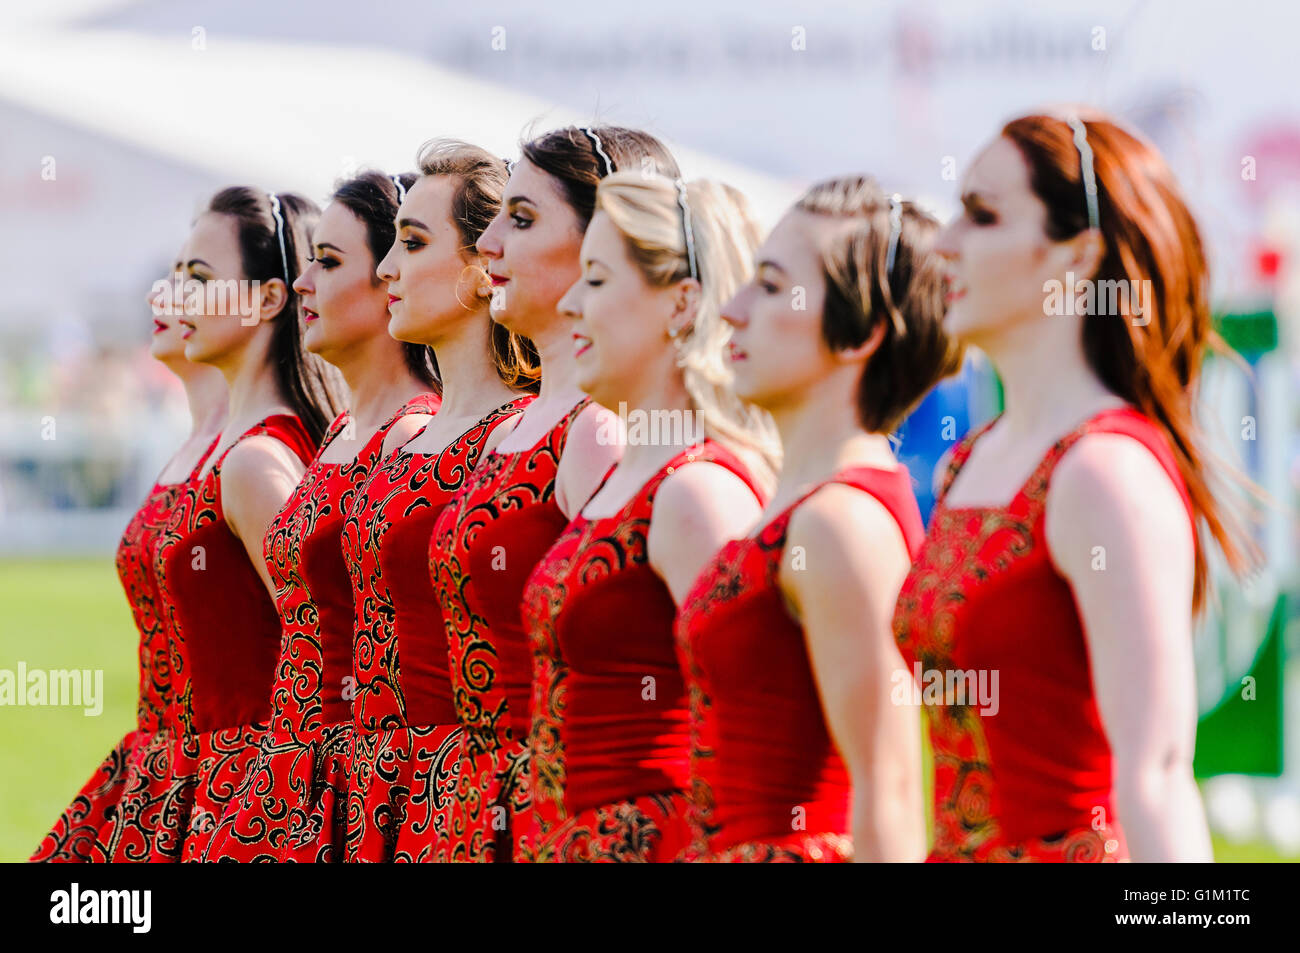 Eight young Irish dancing girls at an outdoor event. Stock Photo